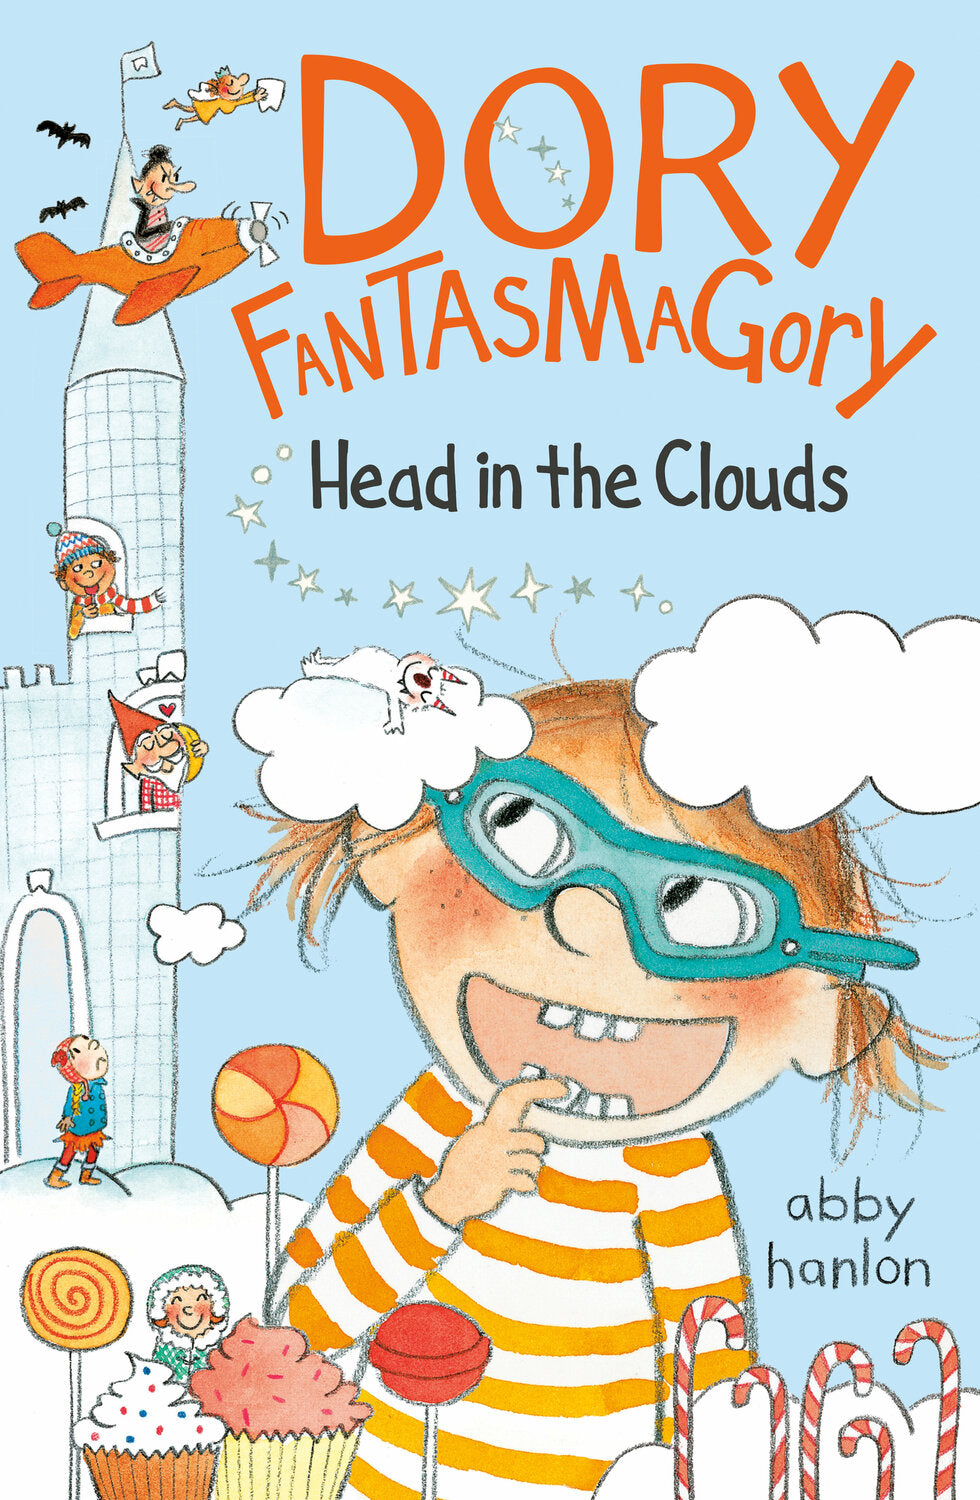 Dory Fantasmagory: Head in the Clouds (Book 4)